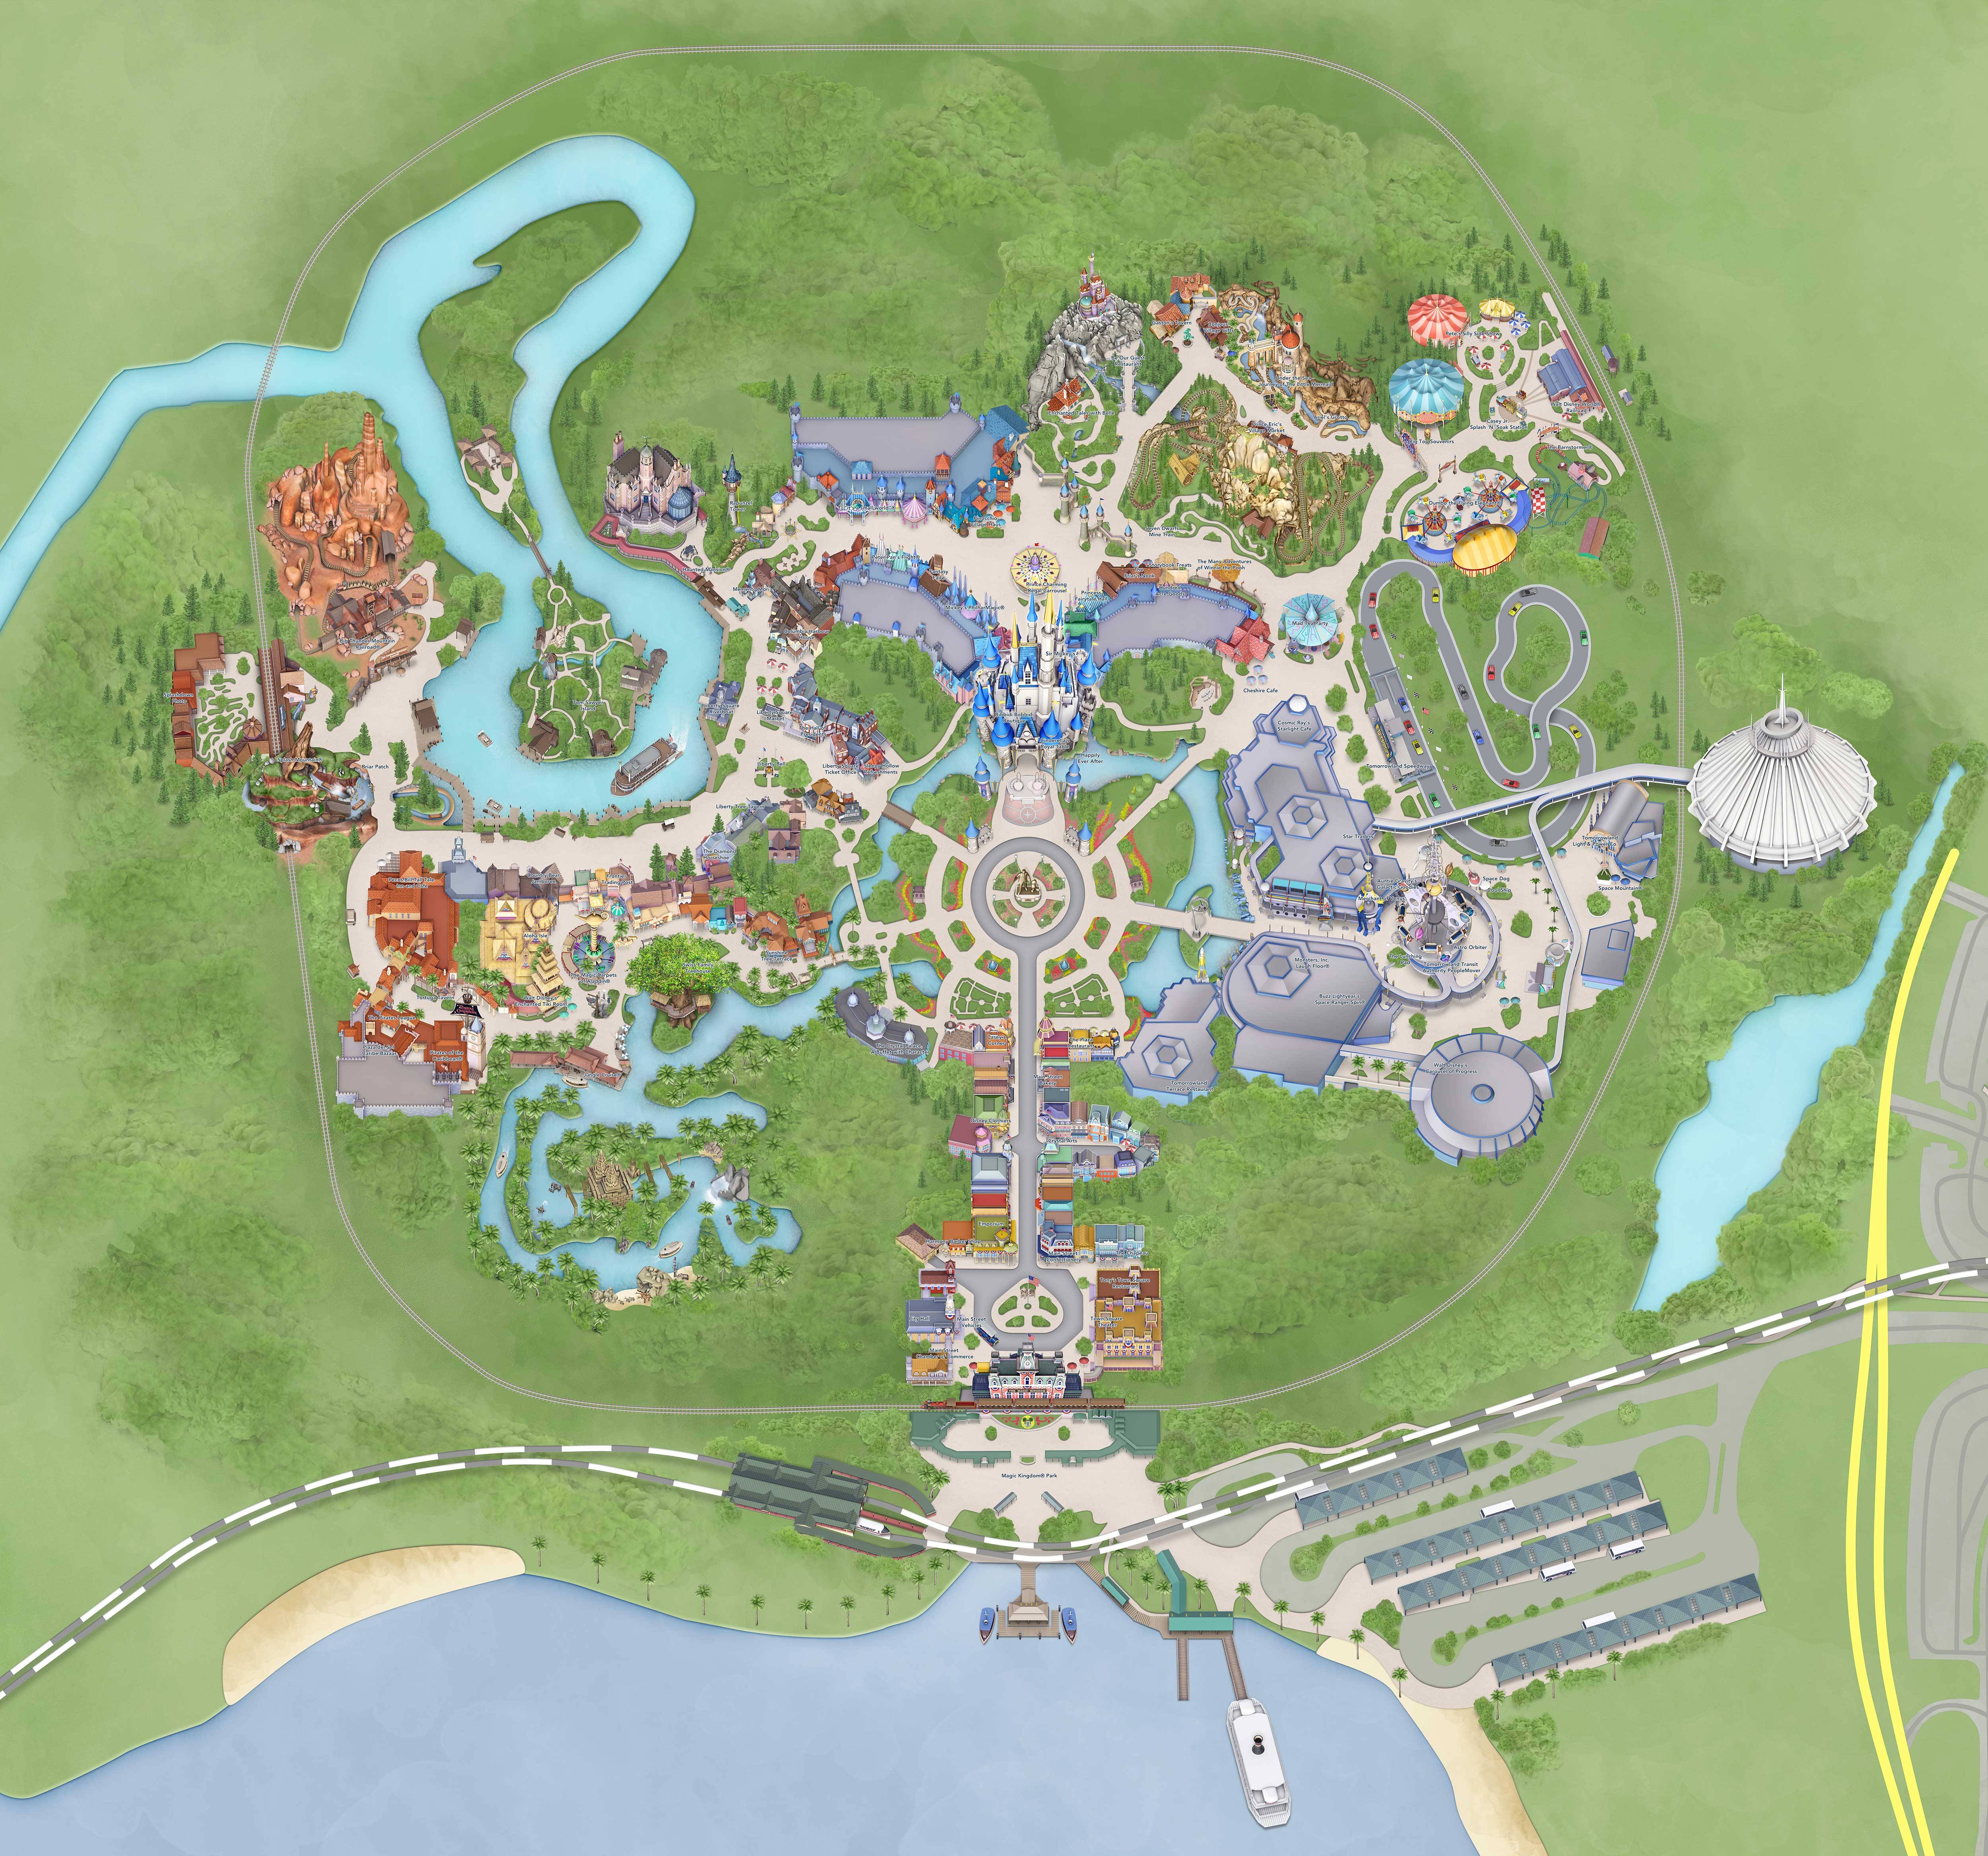 My Disney Experience map update - new look Cinderella Castle and path to Grand Floridian